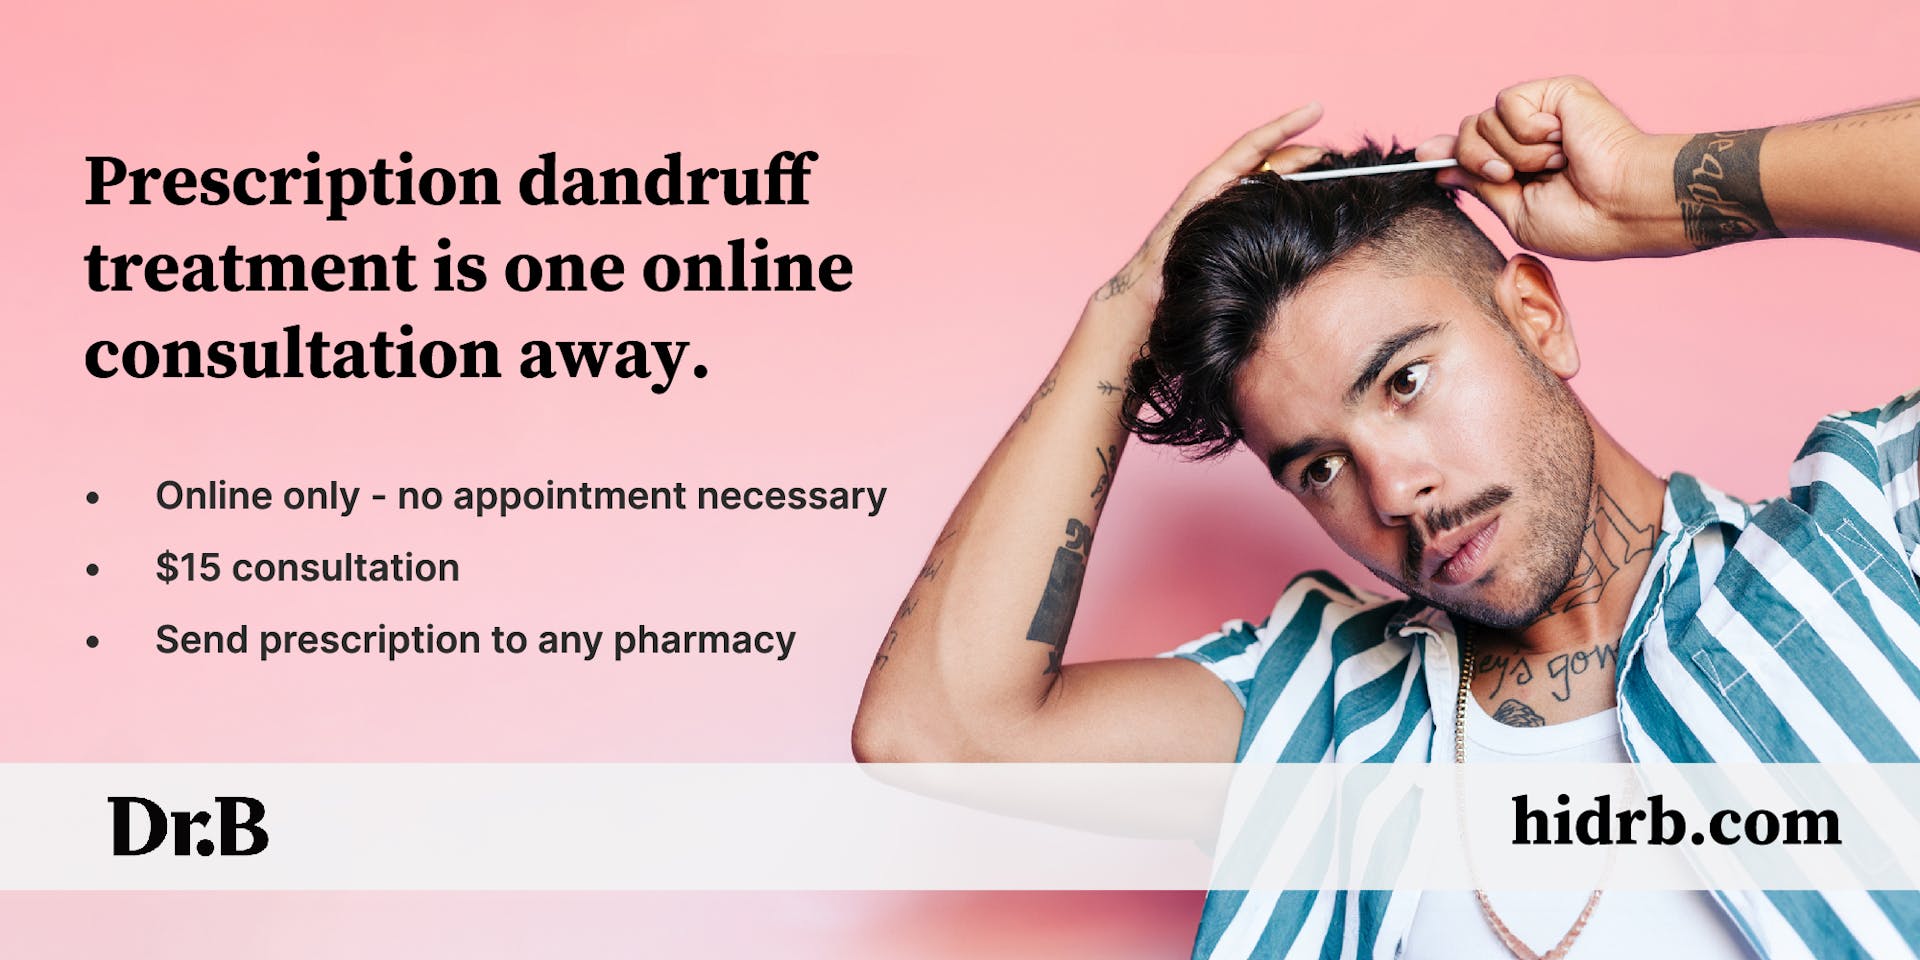 Banner advertising Dr. B's services for dandruff treatments